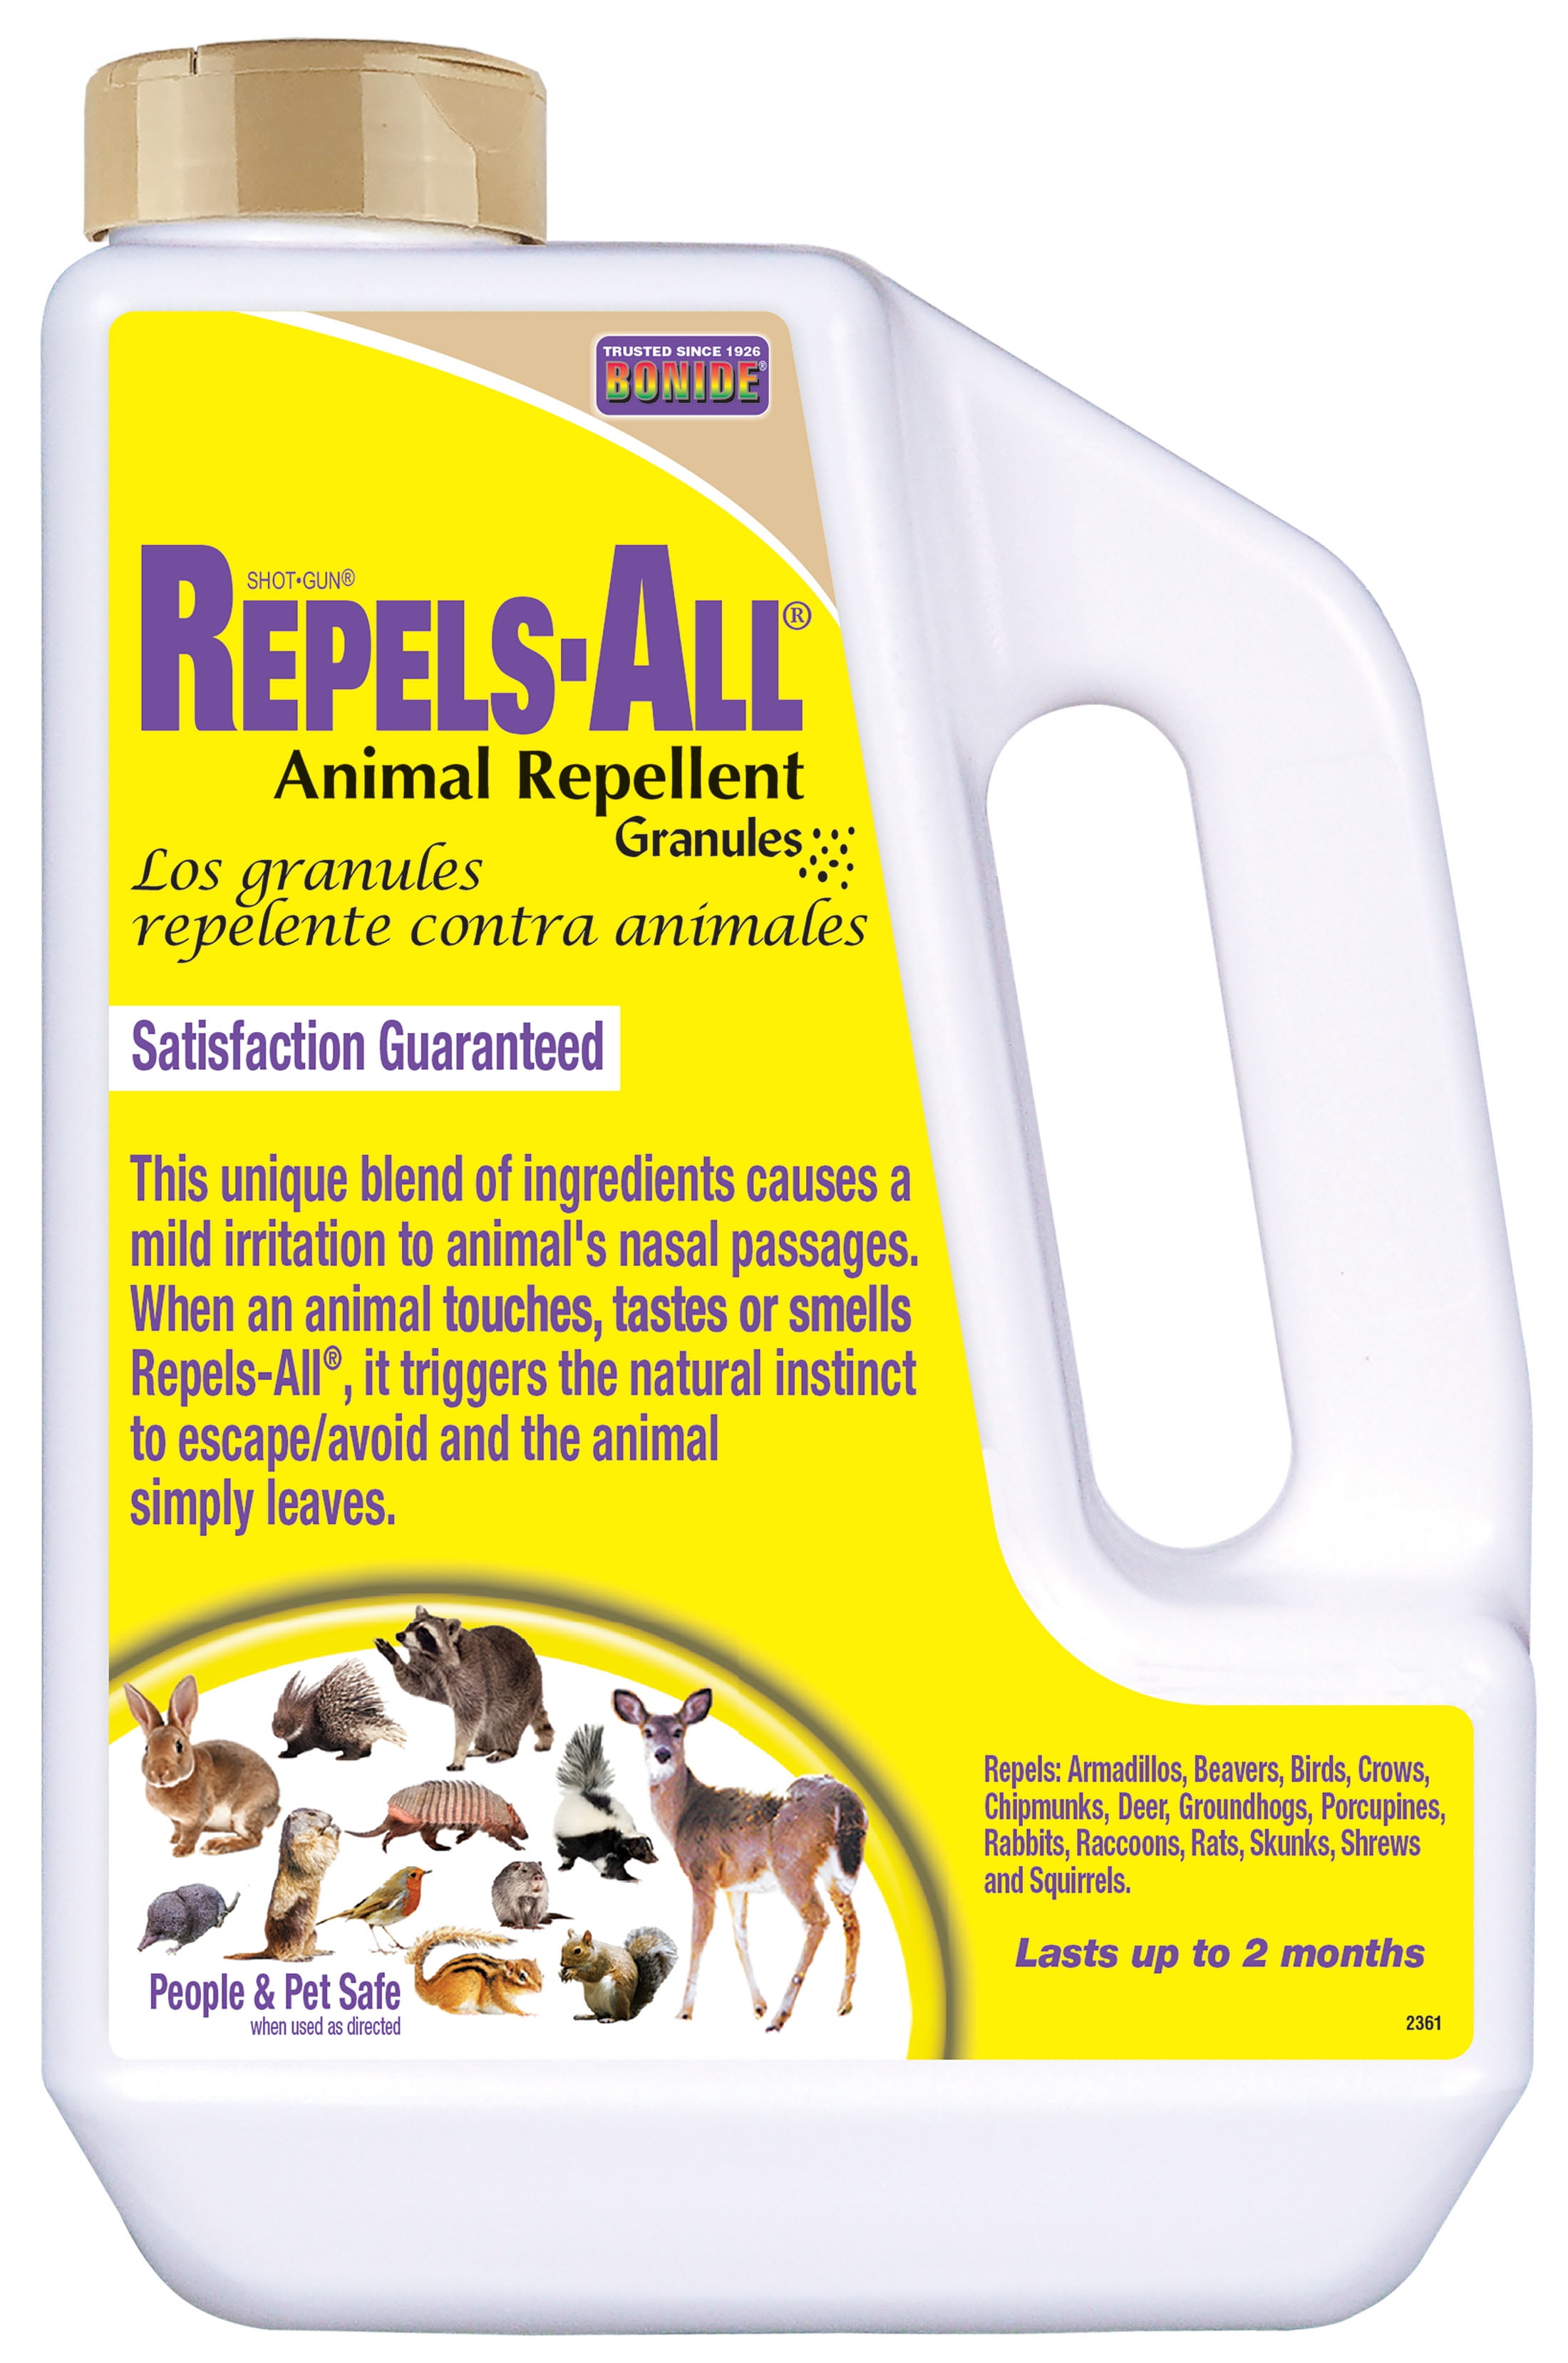 Bonide 3 lb. Repels-All Animal Repellent Granules, Repels by Taste, Smell, and Touch